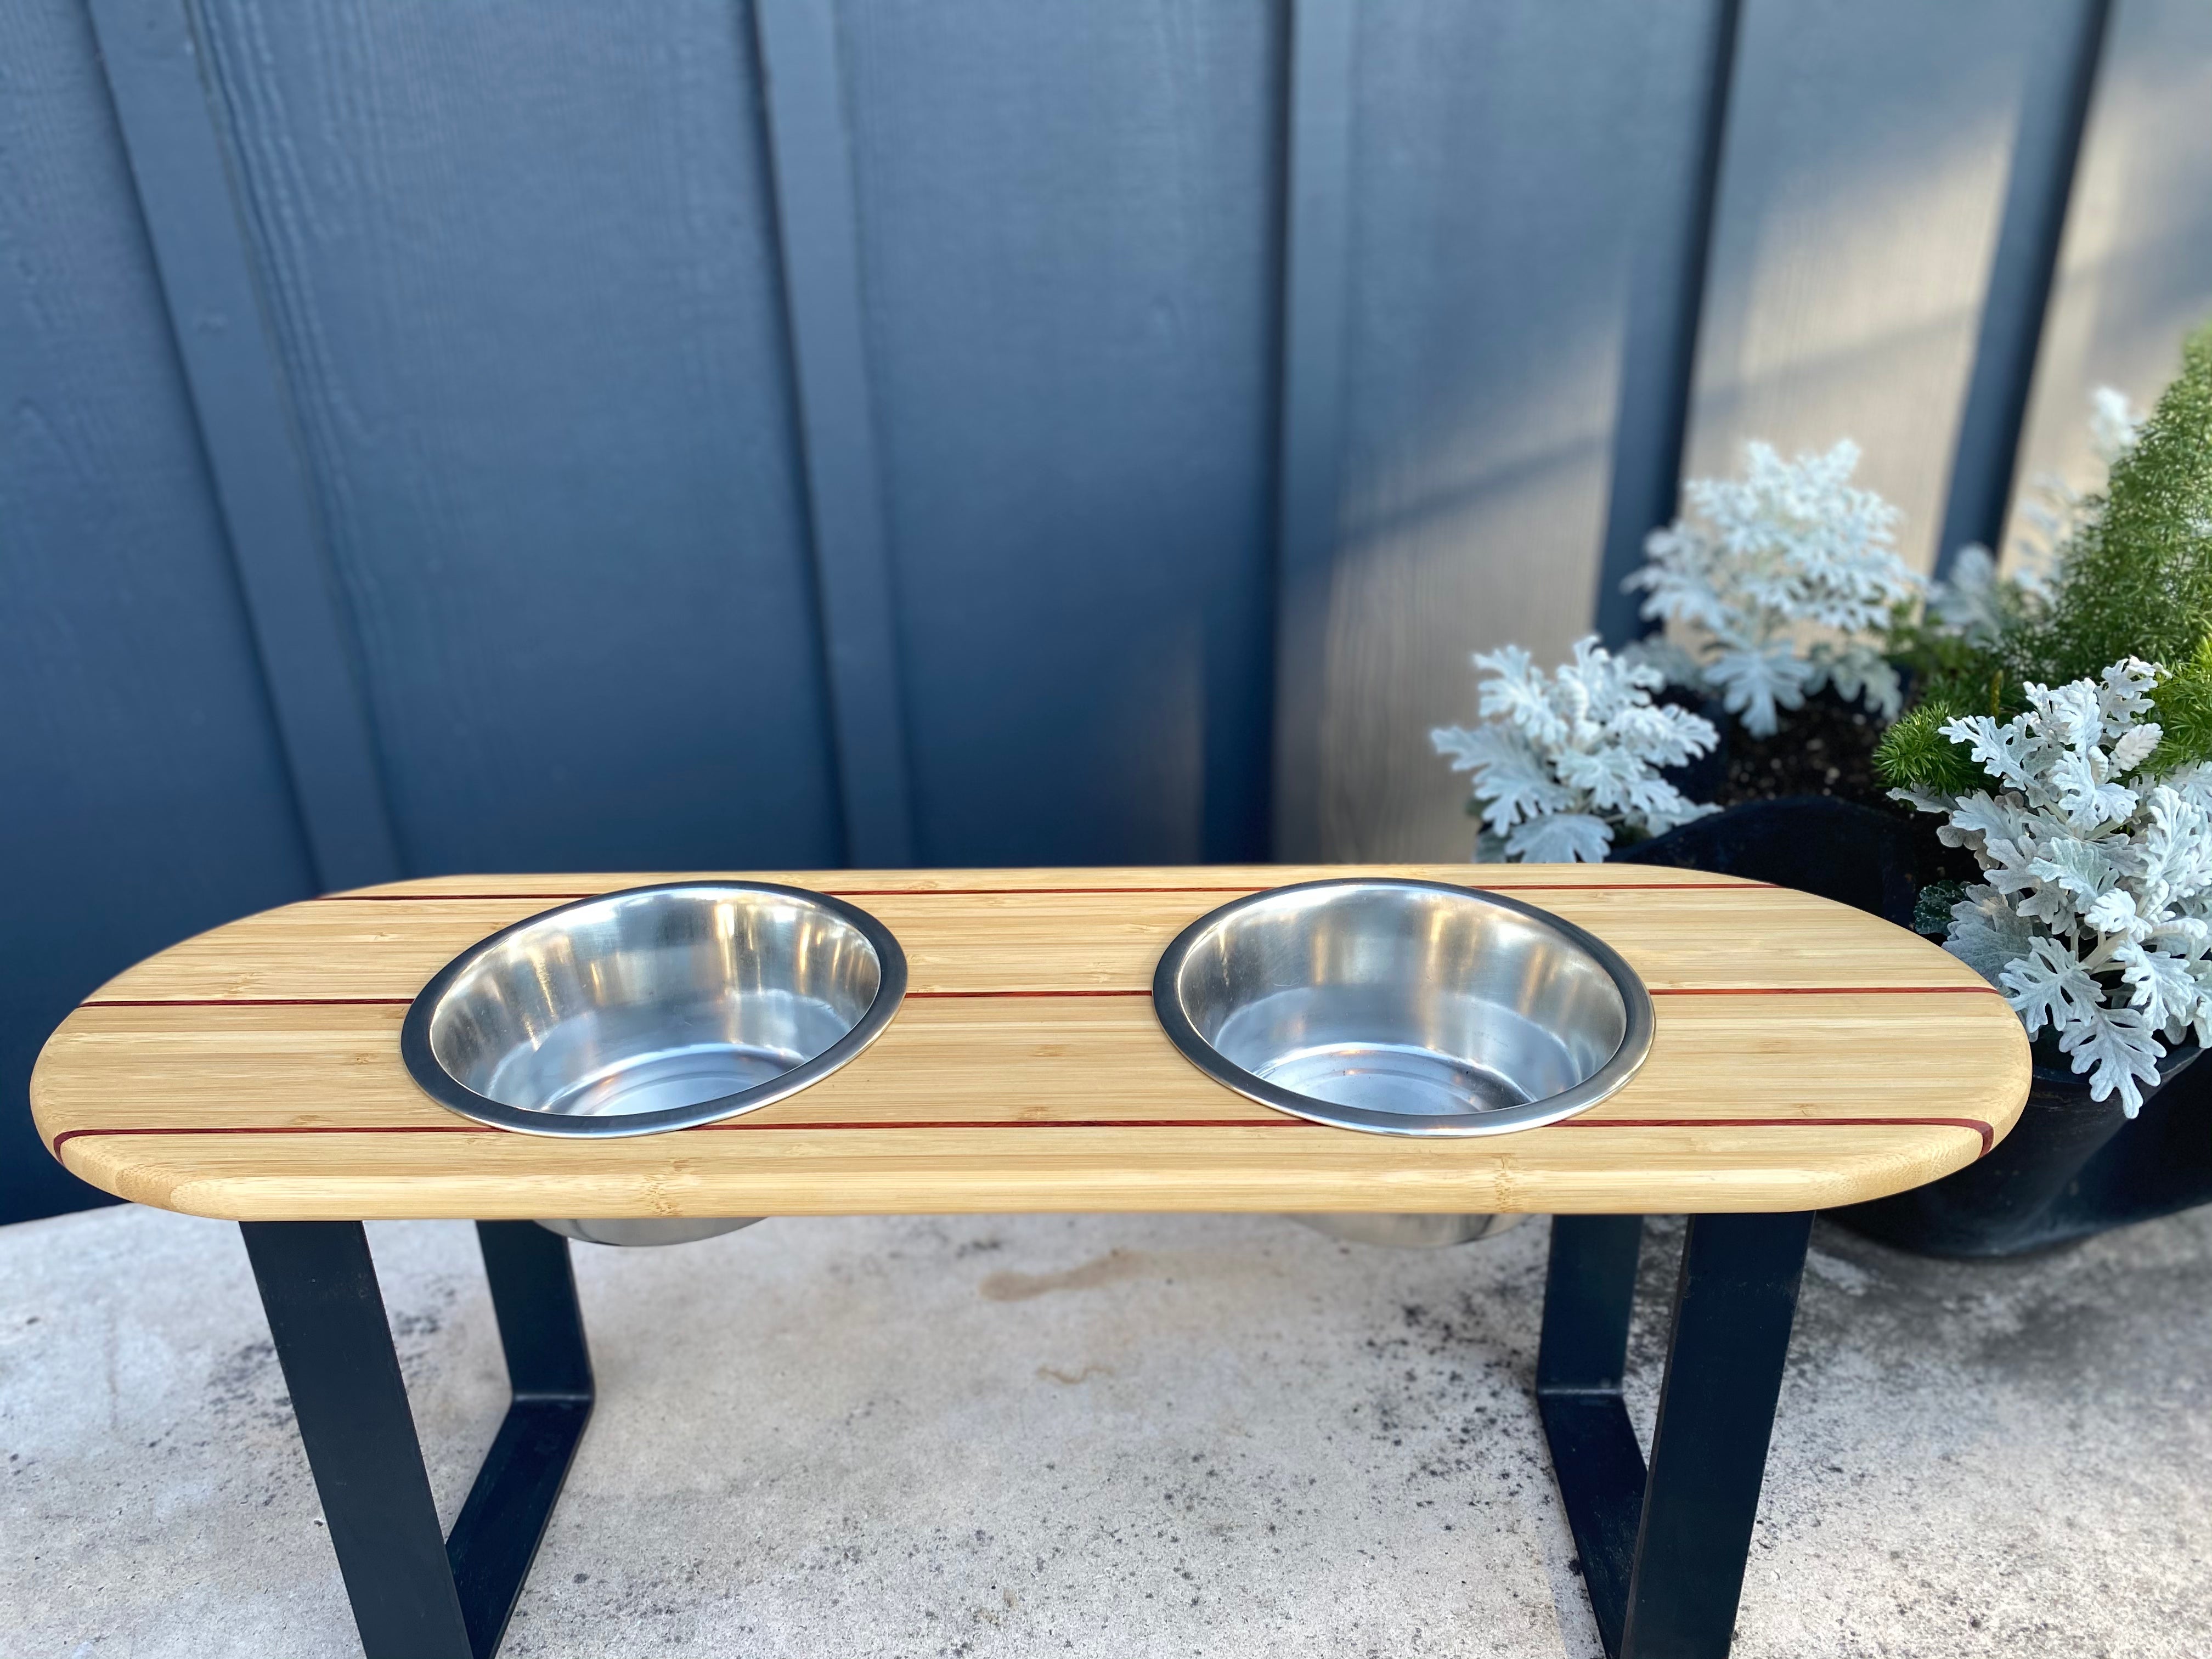 Bamboo Dog Bowl Holder - Local Pick Up or Delivery Only